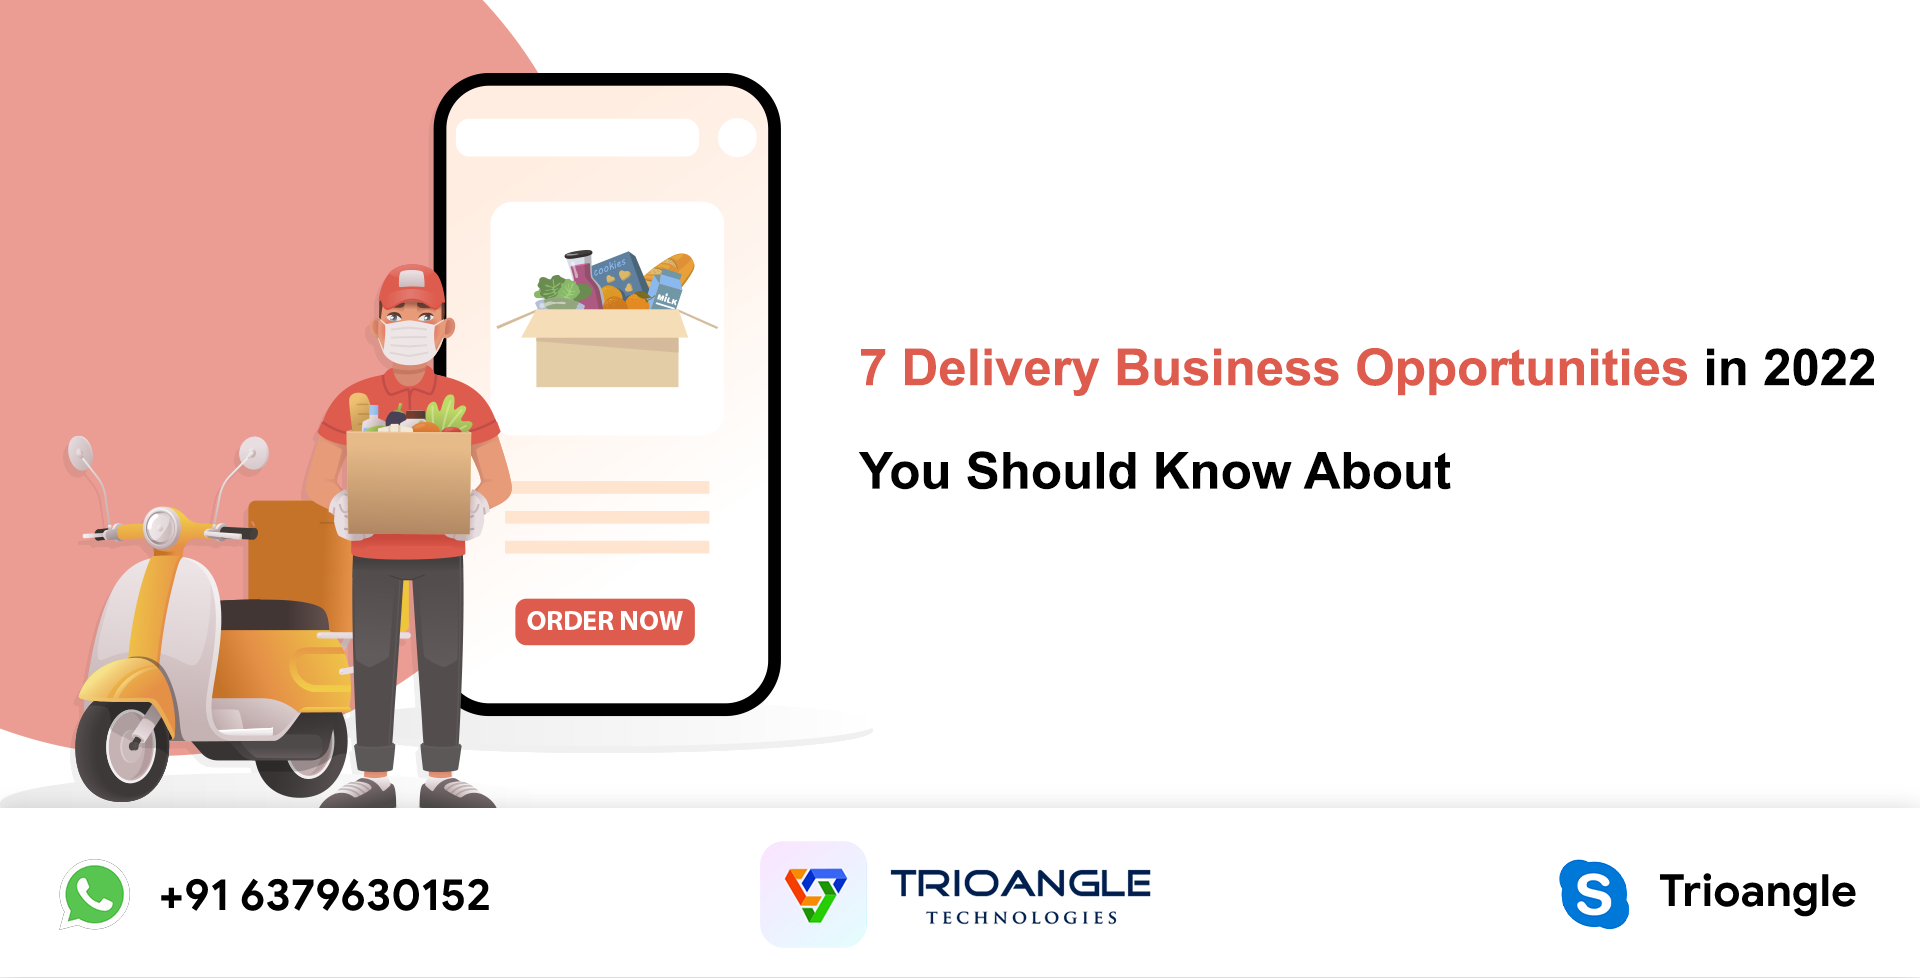 7 Delivery Business Opportunities in 2022 You Should Know About